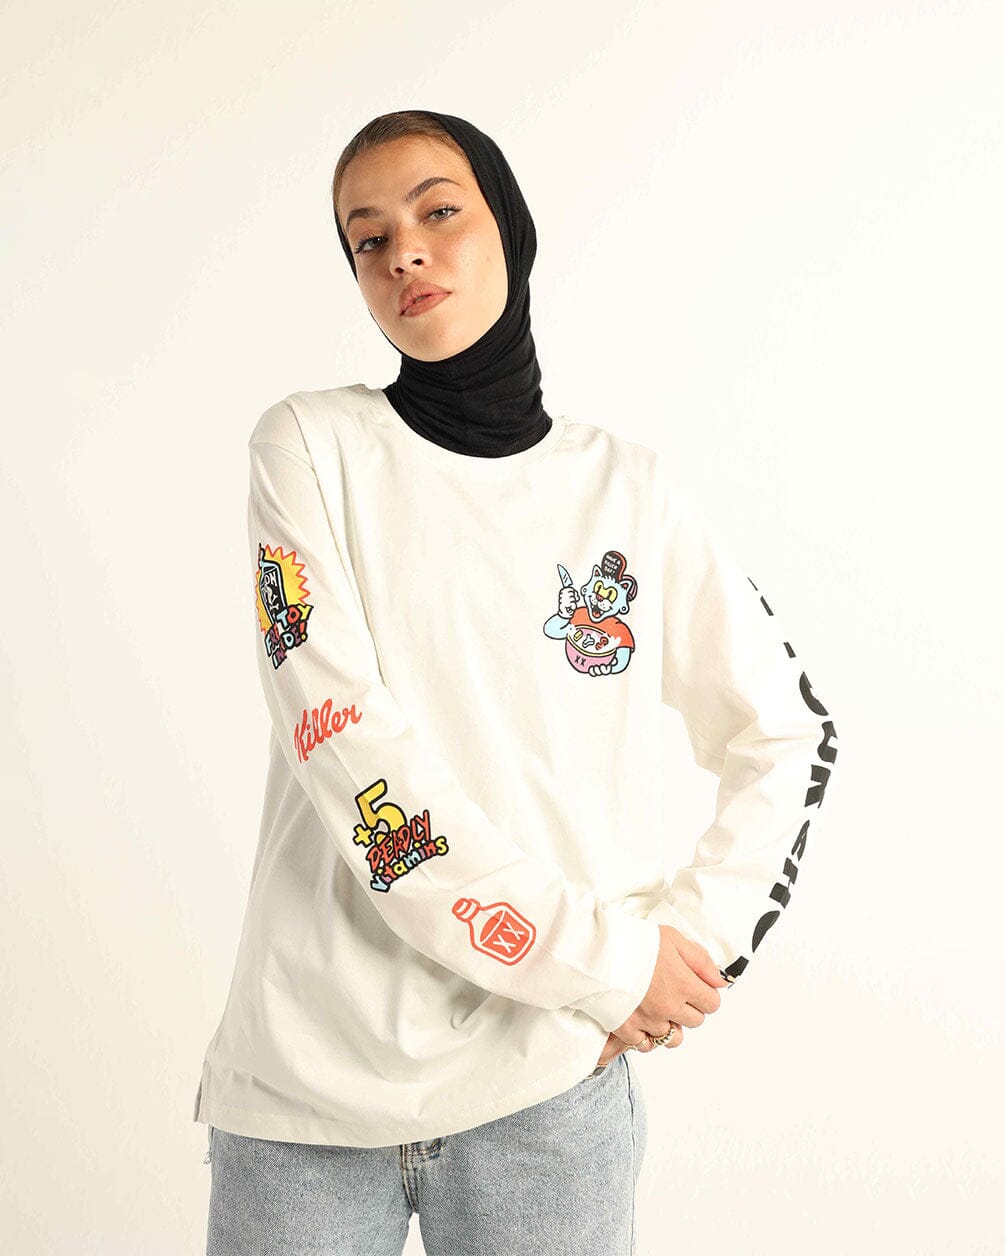 Cereal Killer Long Sleeves Long Sleeves IN YOUR SHOE 